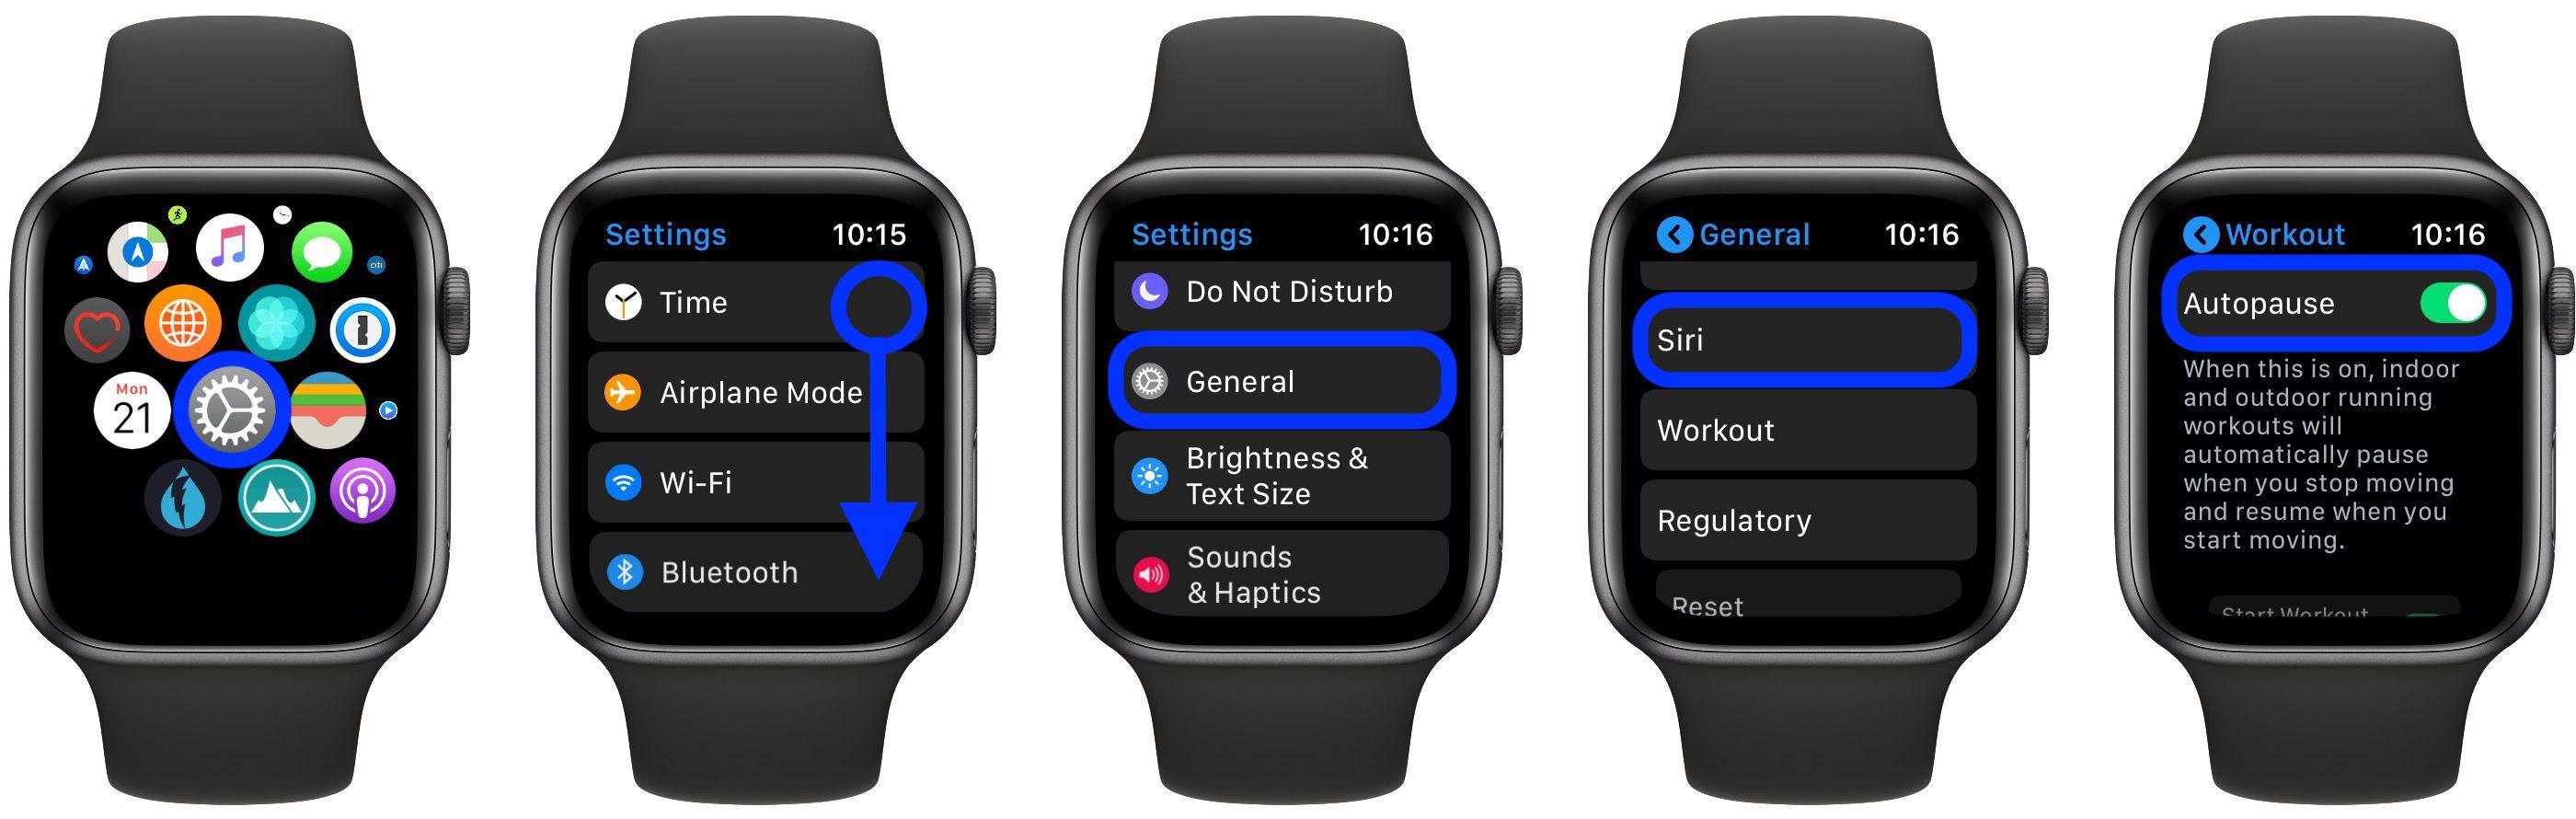  How To Track Beachbody Workouts On Apple Watch for push your ABS